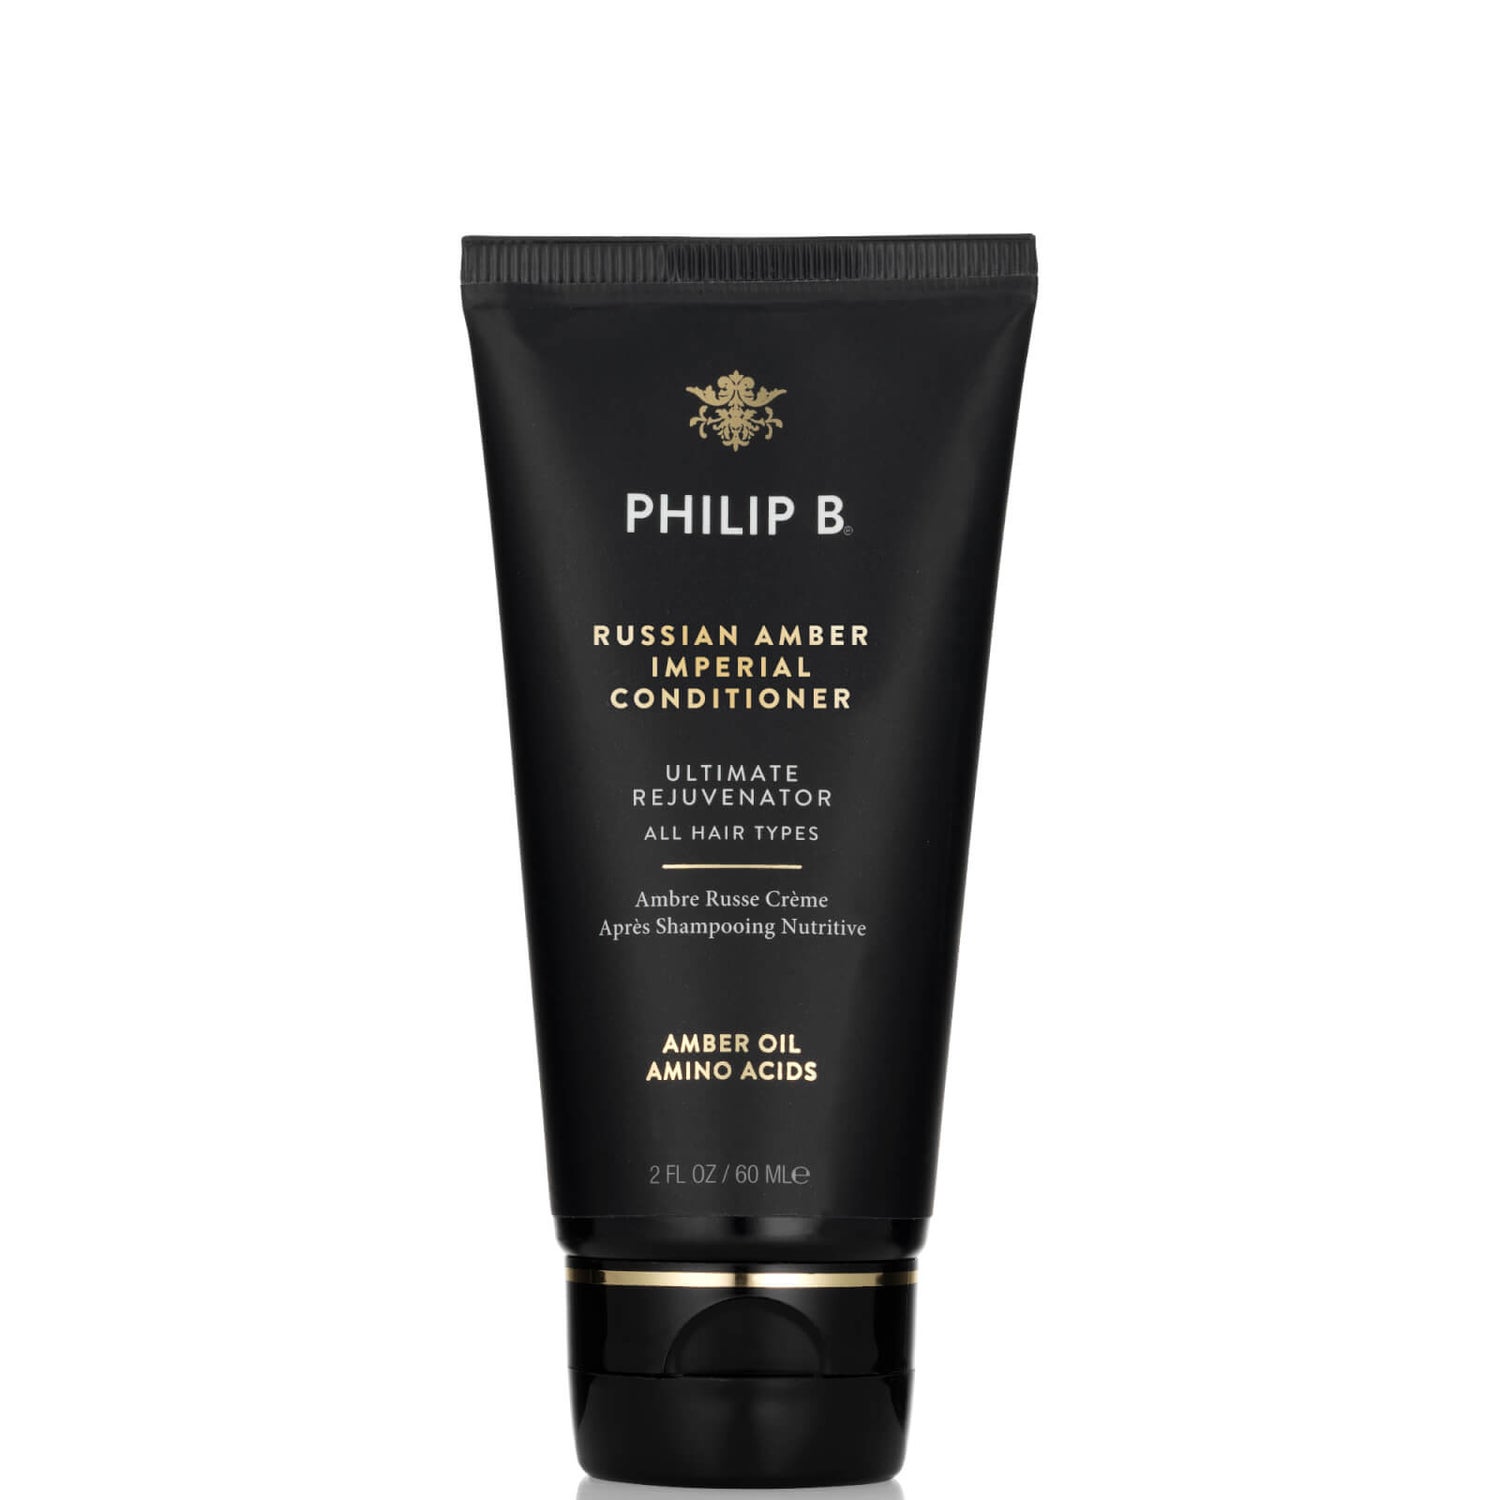 Philip B Russian Amber Imperial Conditioning Crème (60ml)